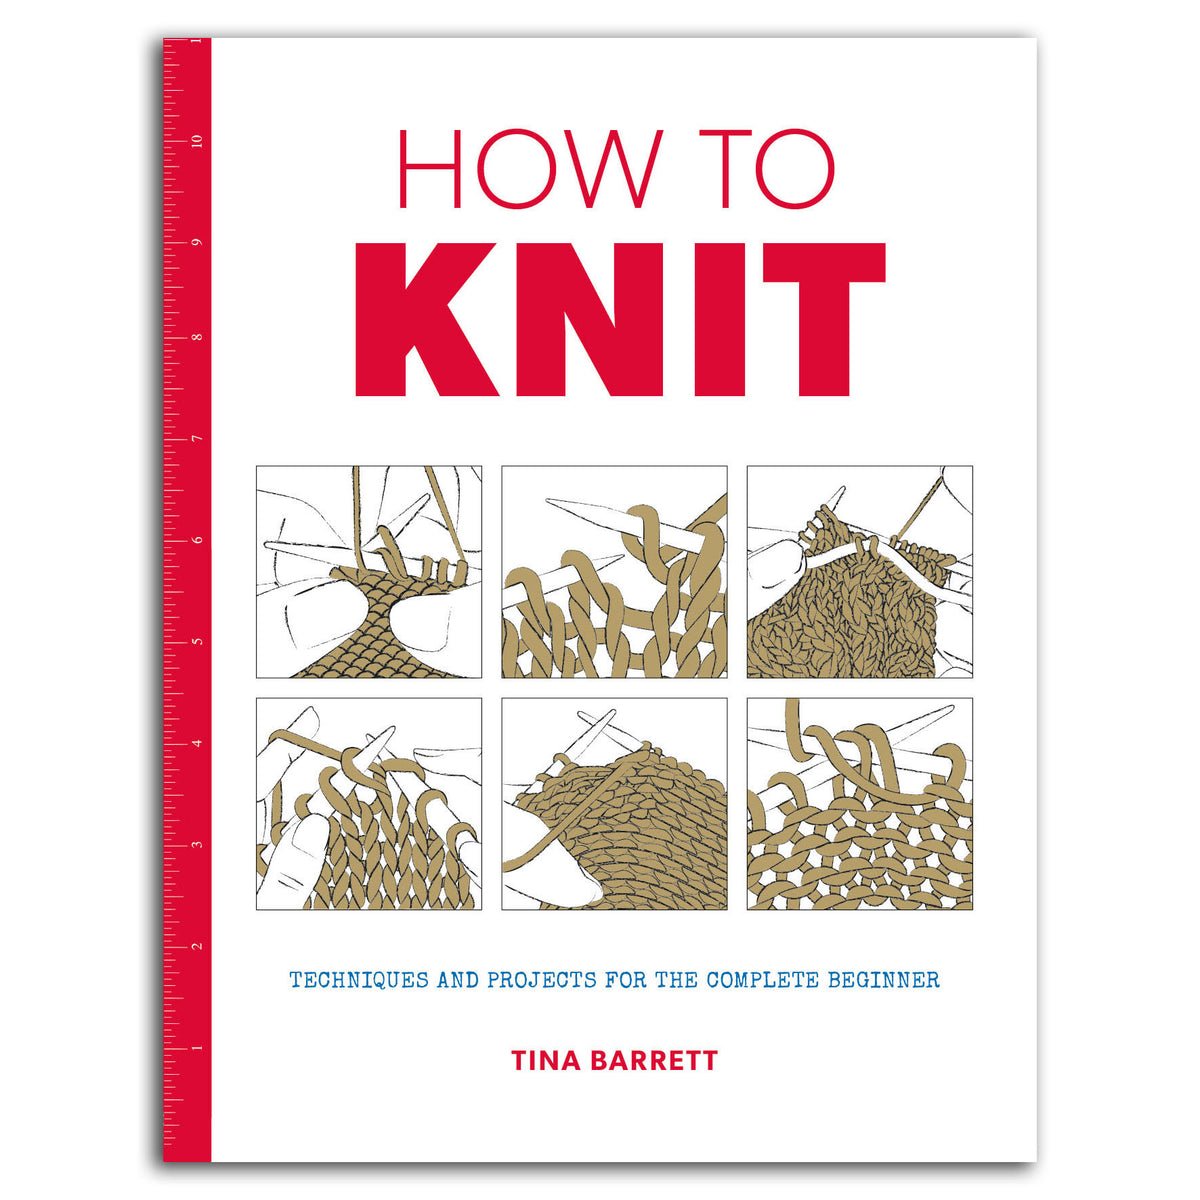 How to Knit: Techniques and Projects for the Complete Beginner [Book]